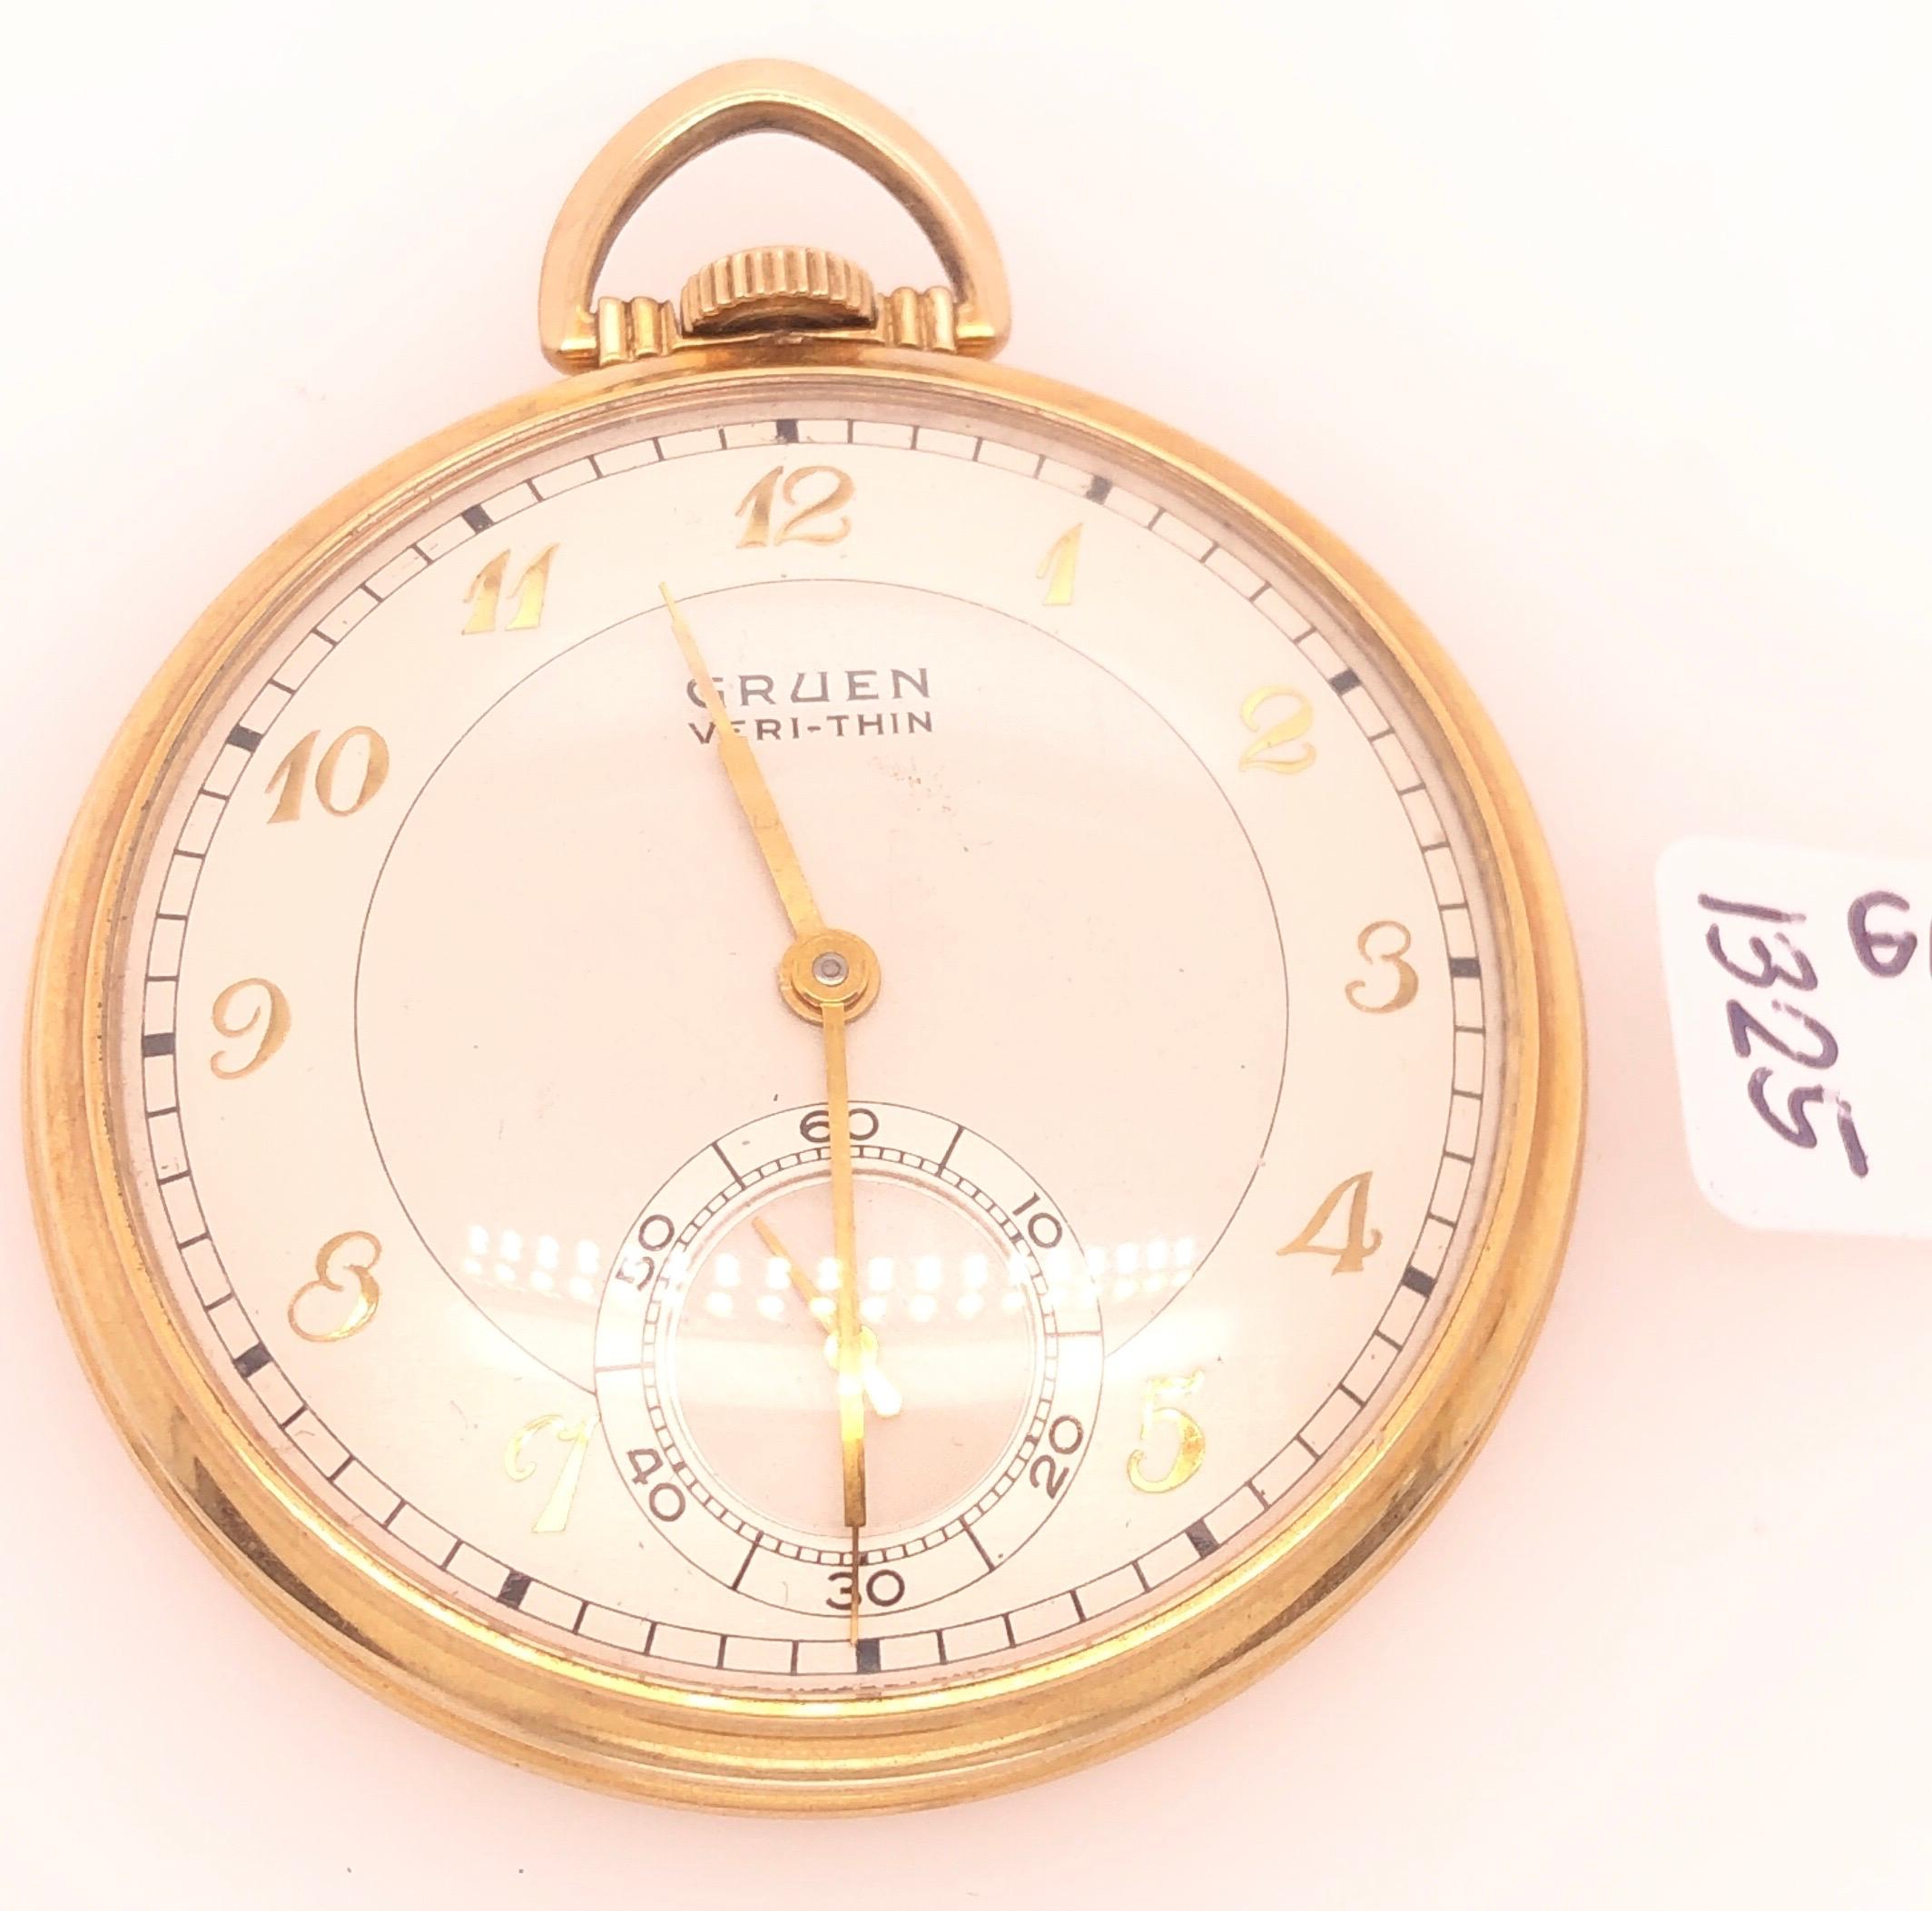 Gruen Open Face Veri-Thin 10 Karat Gold Filled Pocket Watch 15 Jewels In Good Condition For Sale In Stamford, CT